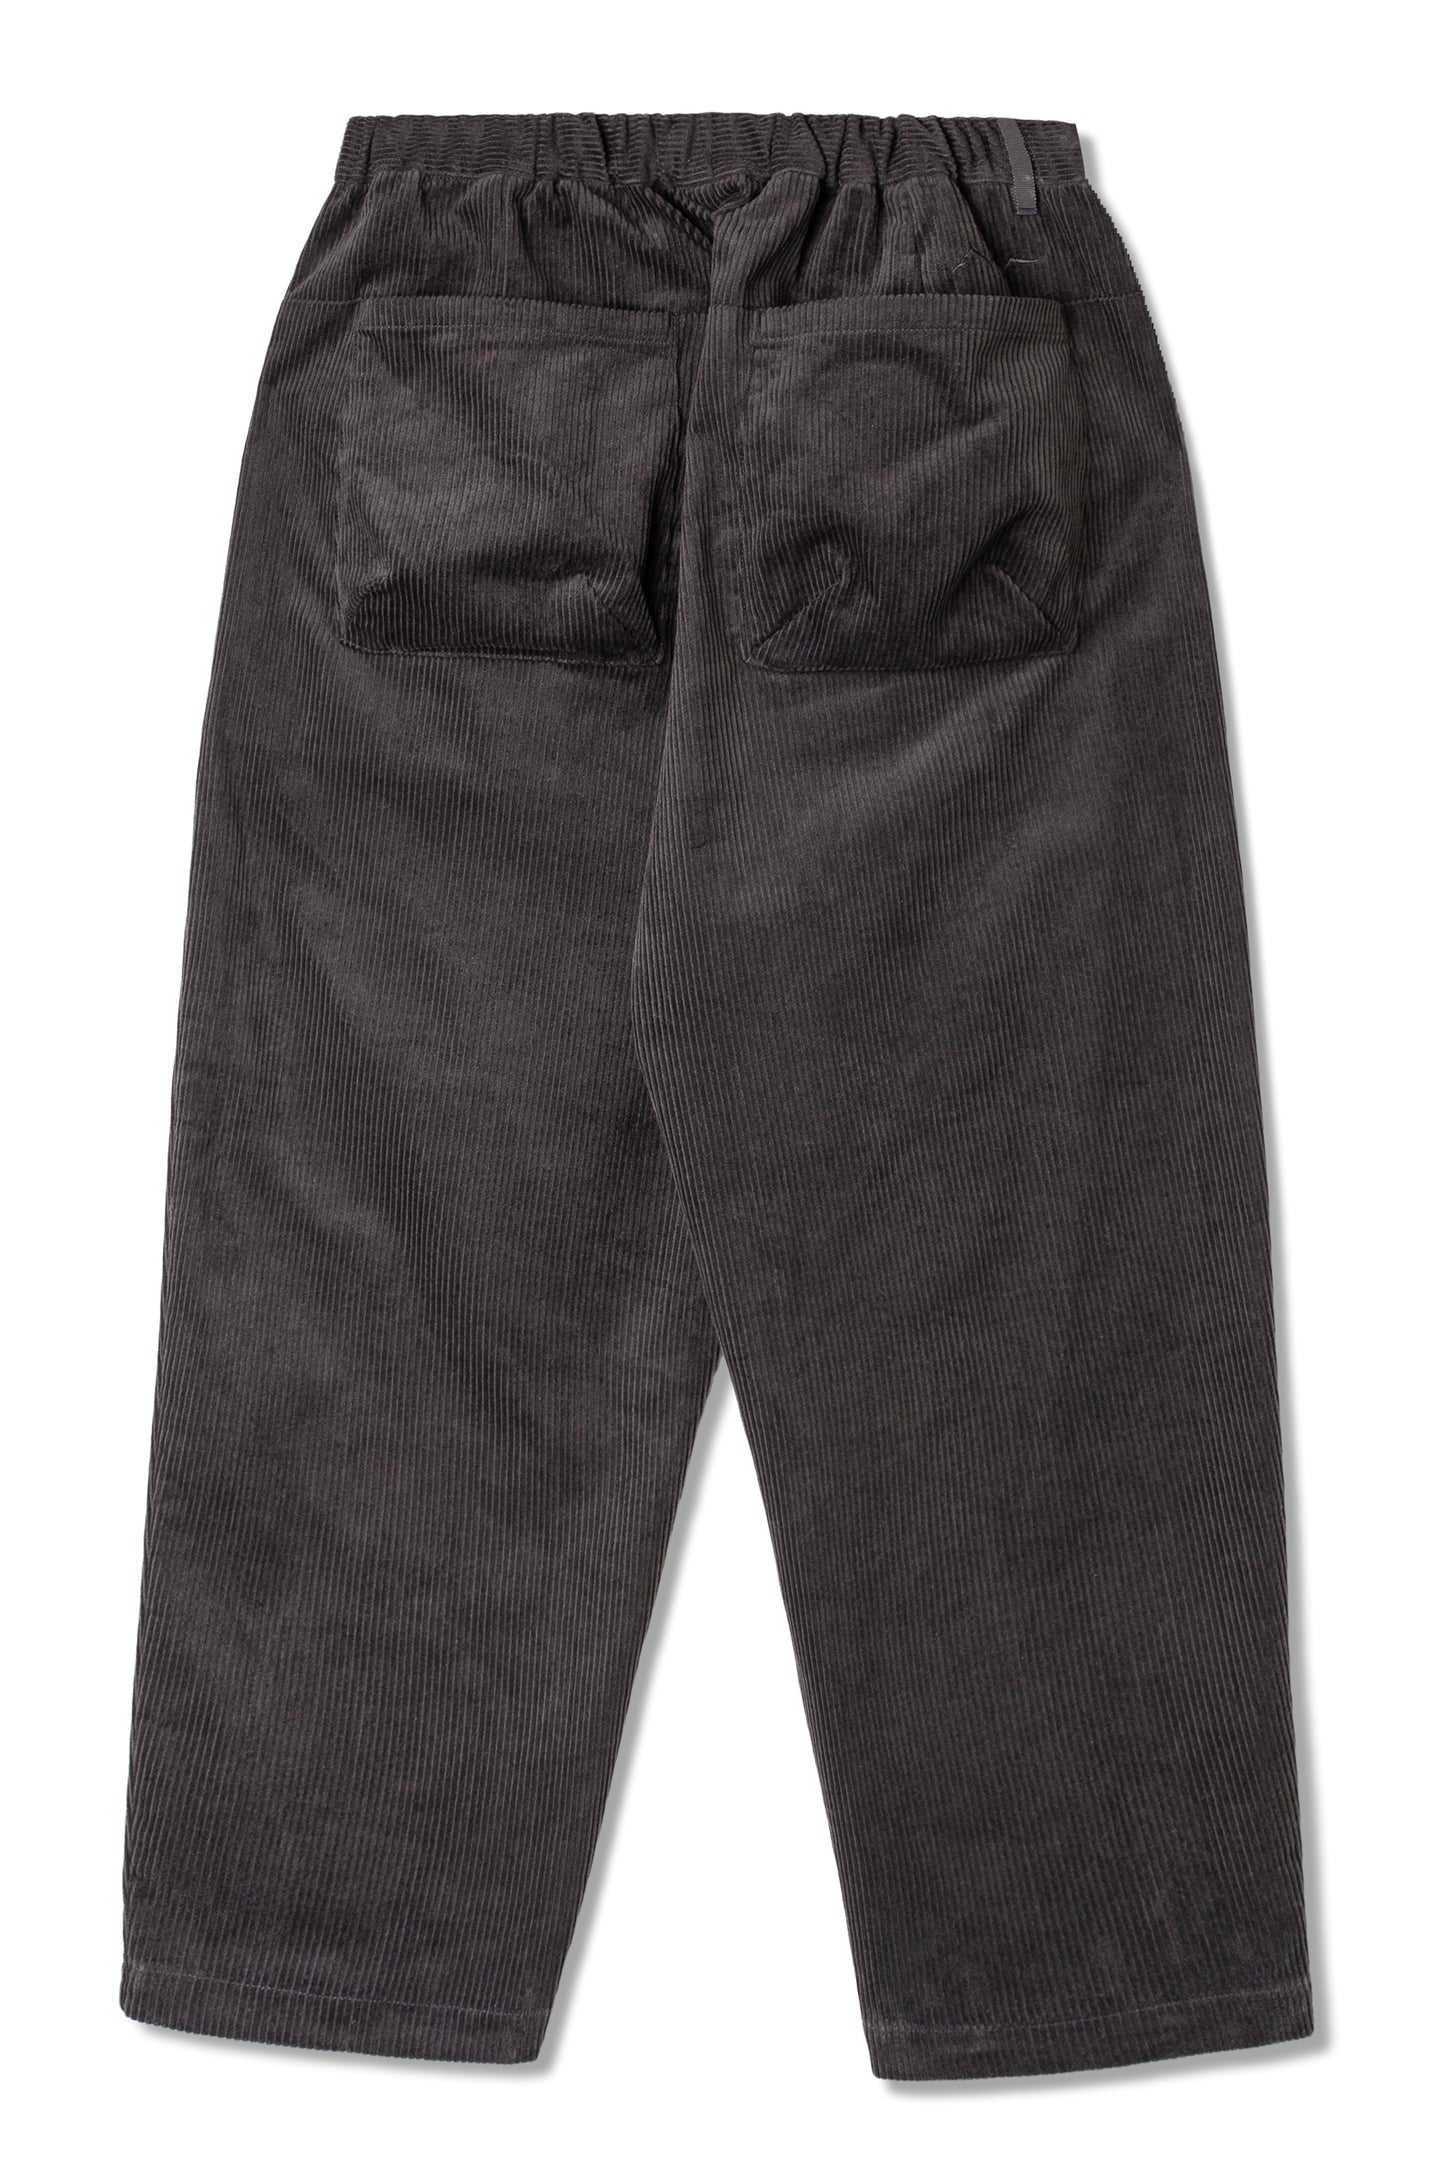 8W Cocoon Pant (Grey)